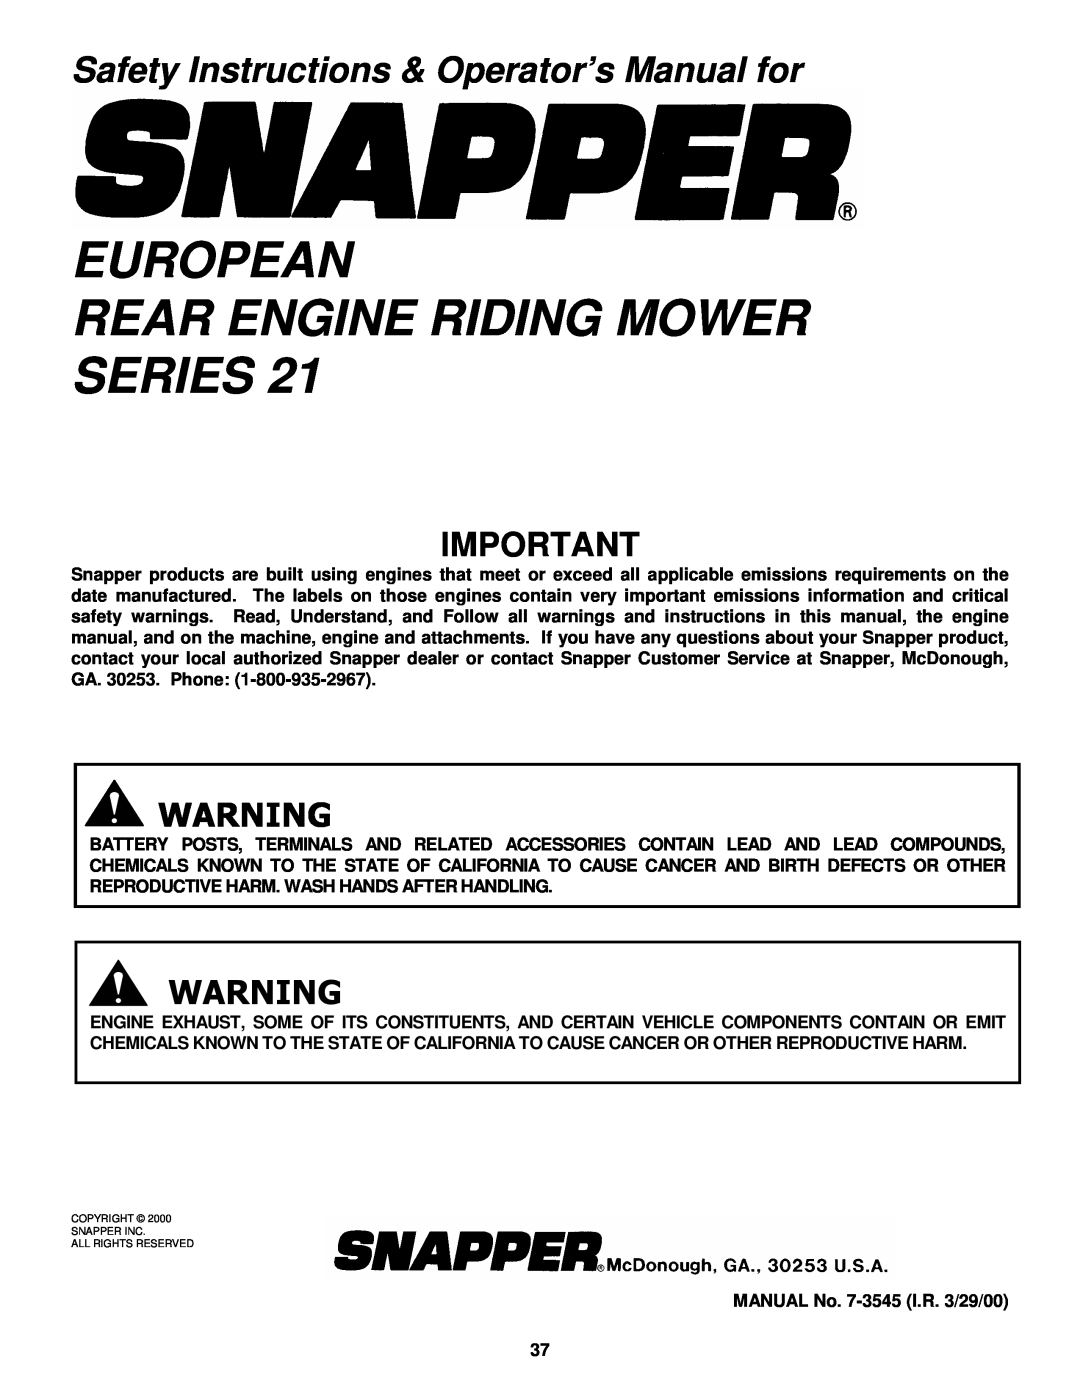 Snapper EM250821BE, EM281021BE European Rear Engine Riding Mower Series, Safety Instructions & Operator’s Manual for 